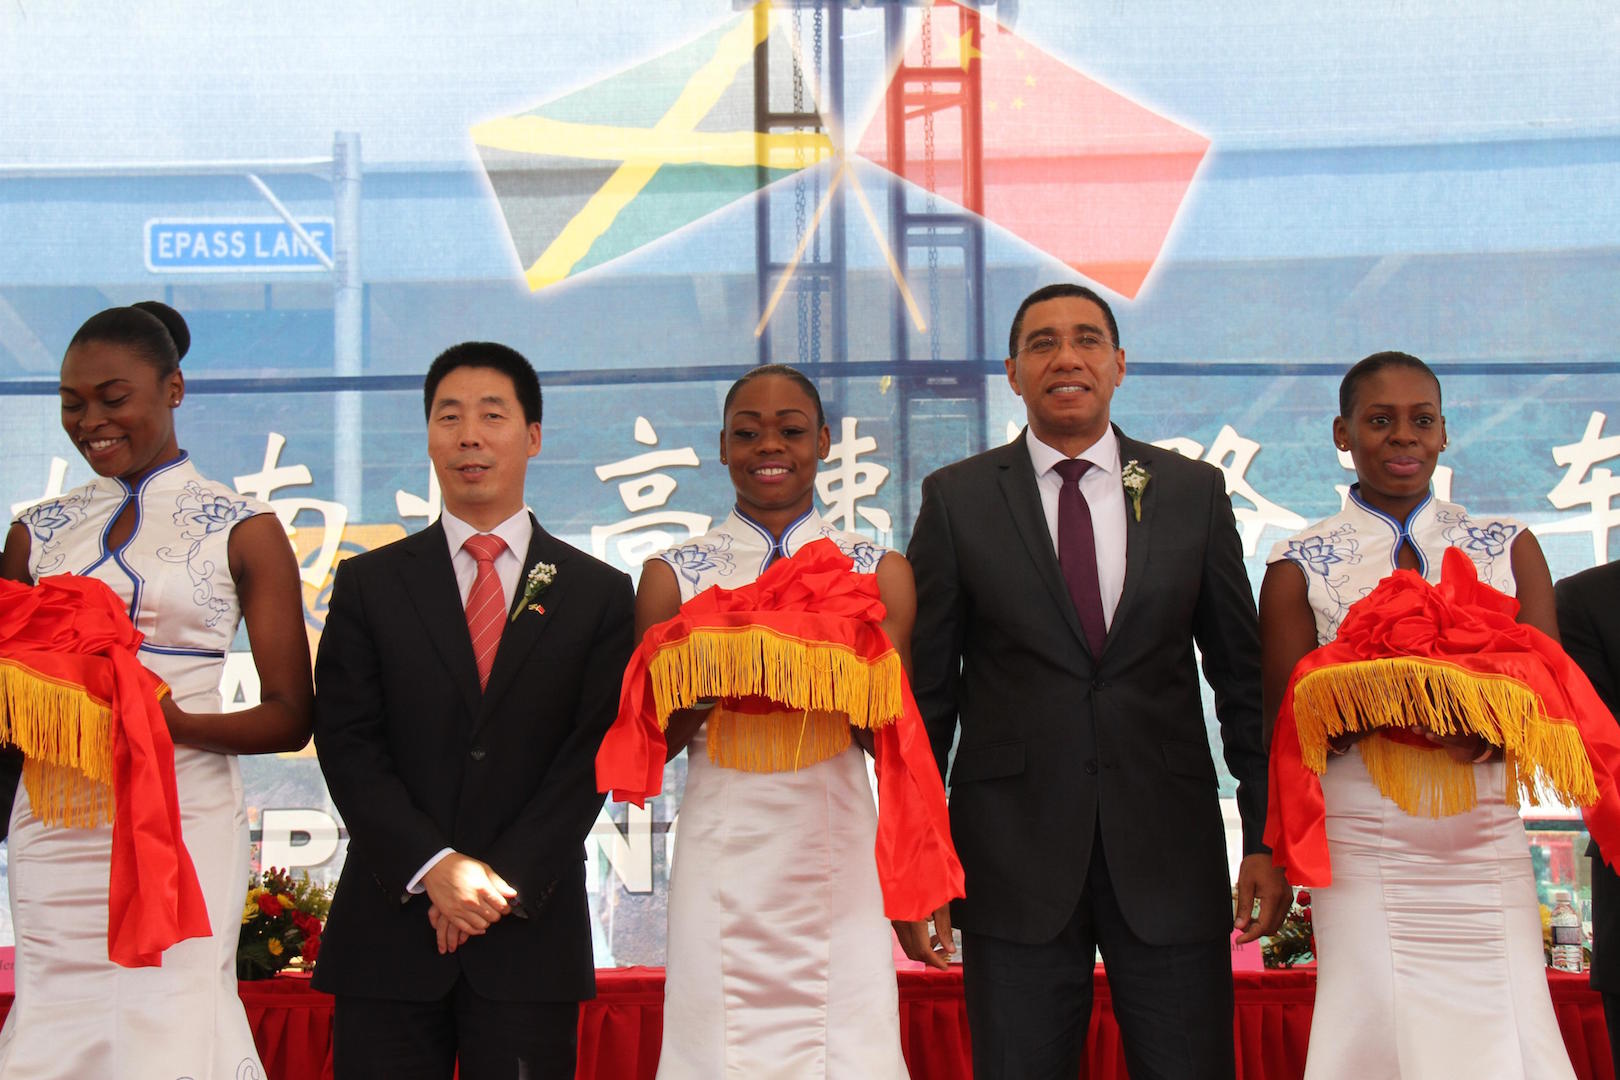 Jamaican Prime Minister Andrew Holness (2nd R) and Chinese Ambassador to Jamaica Niu Qingbao (2nd L) attend the ribbon cutting ceremony for CCCC's North-South Highway in Caymanas, Jamaica